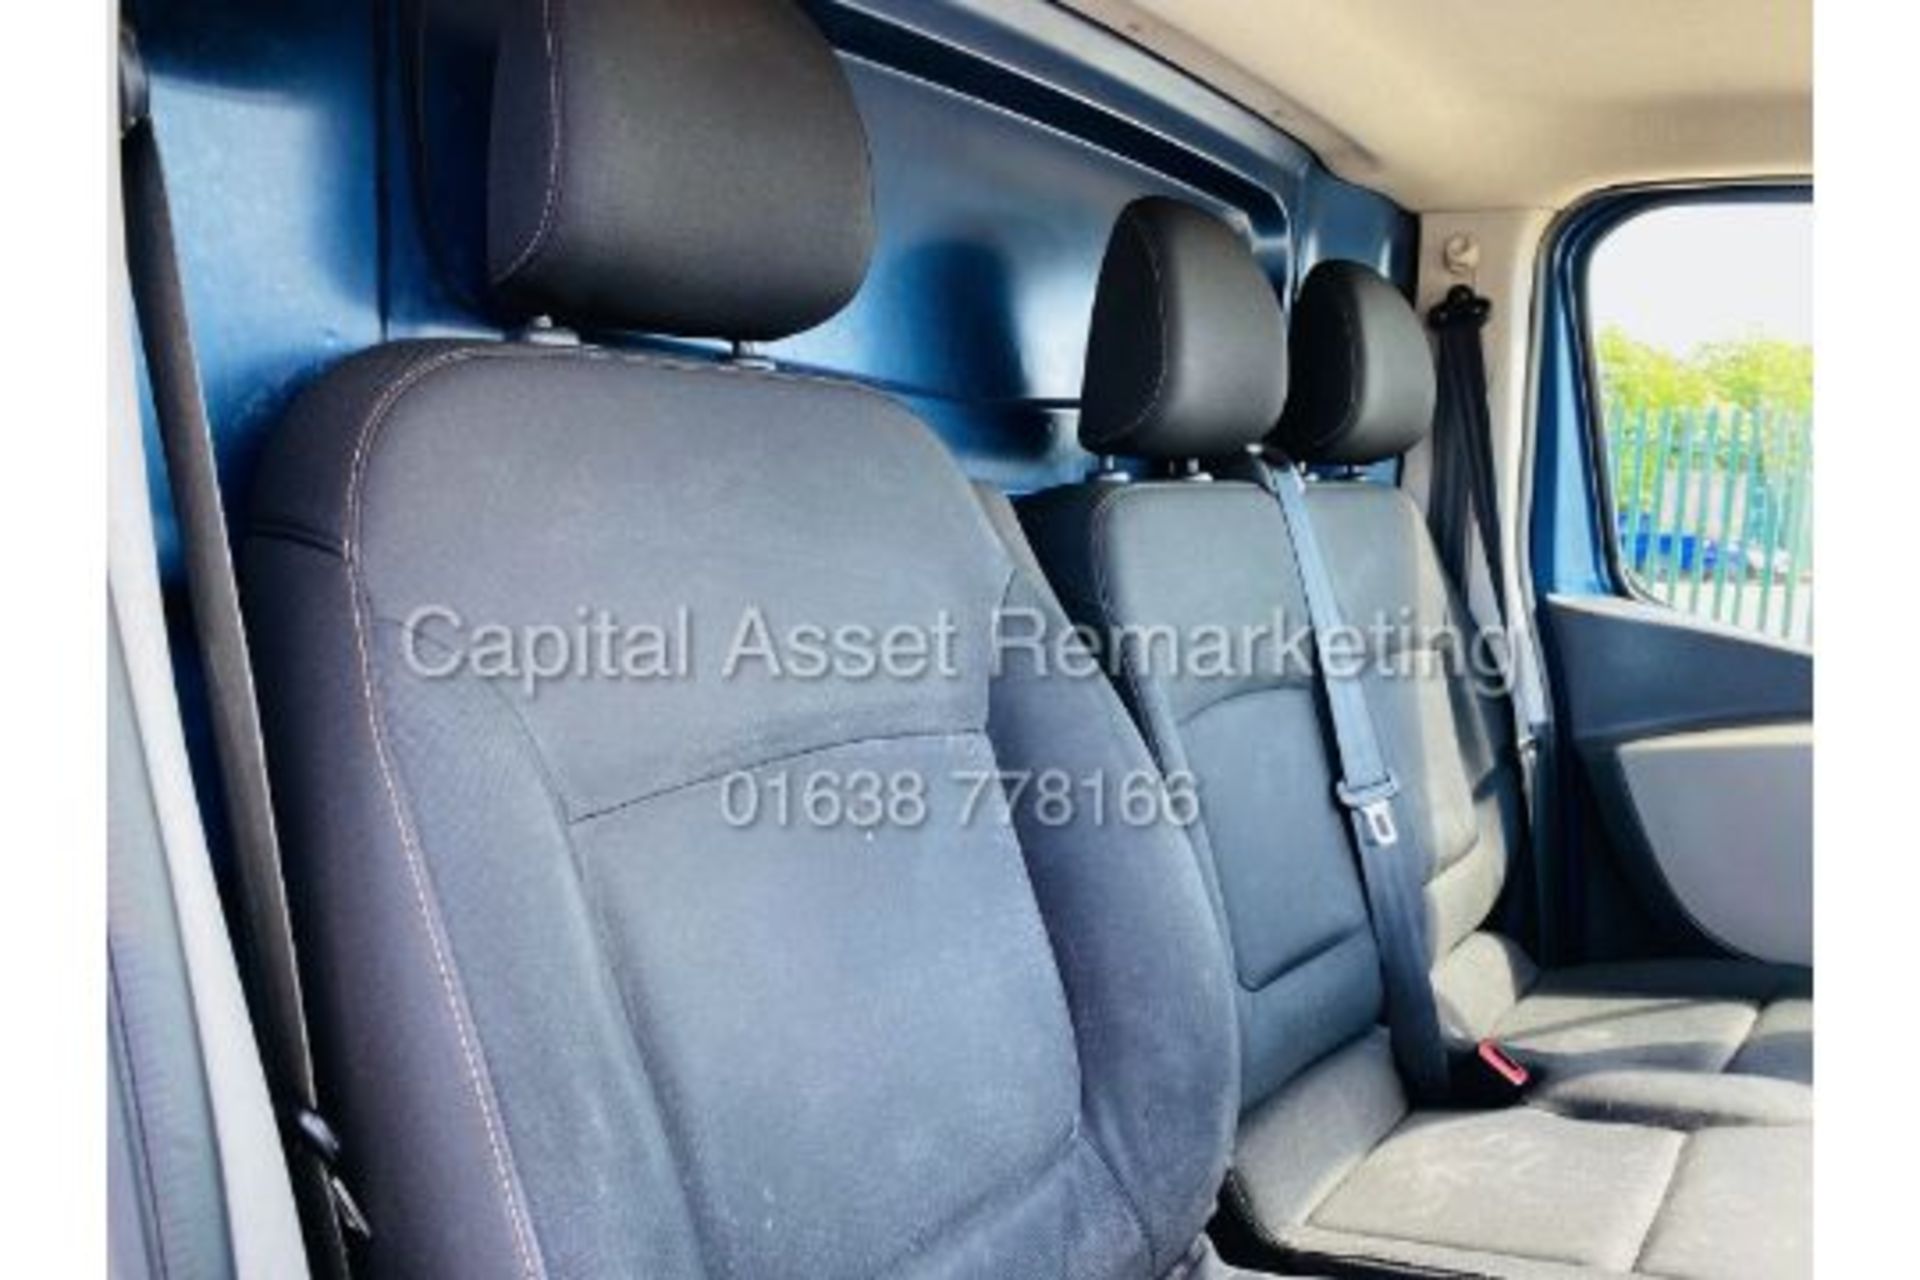 (ON SALE) RENAULT TRAFIC 1.6DCI "BUSINESS EDITION" LWB - 16 REG - AIR CON - MET PAINT - ELEC PACK - Image 11 of 21